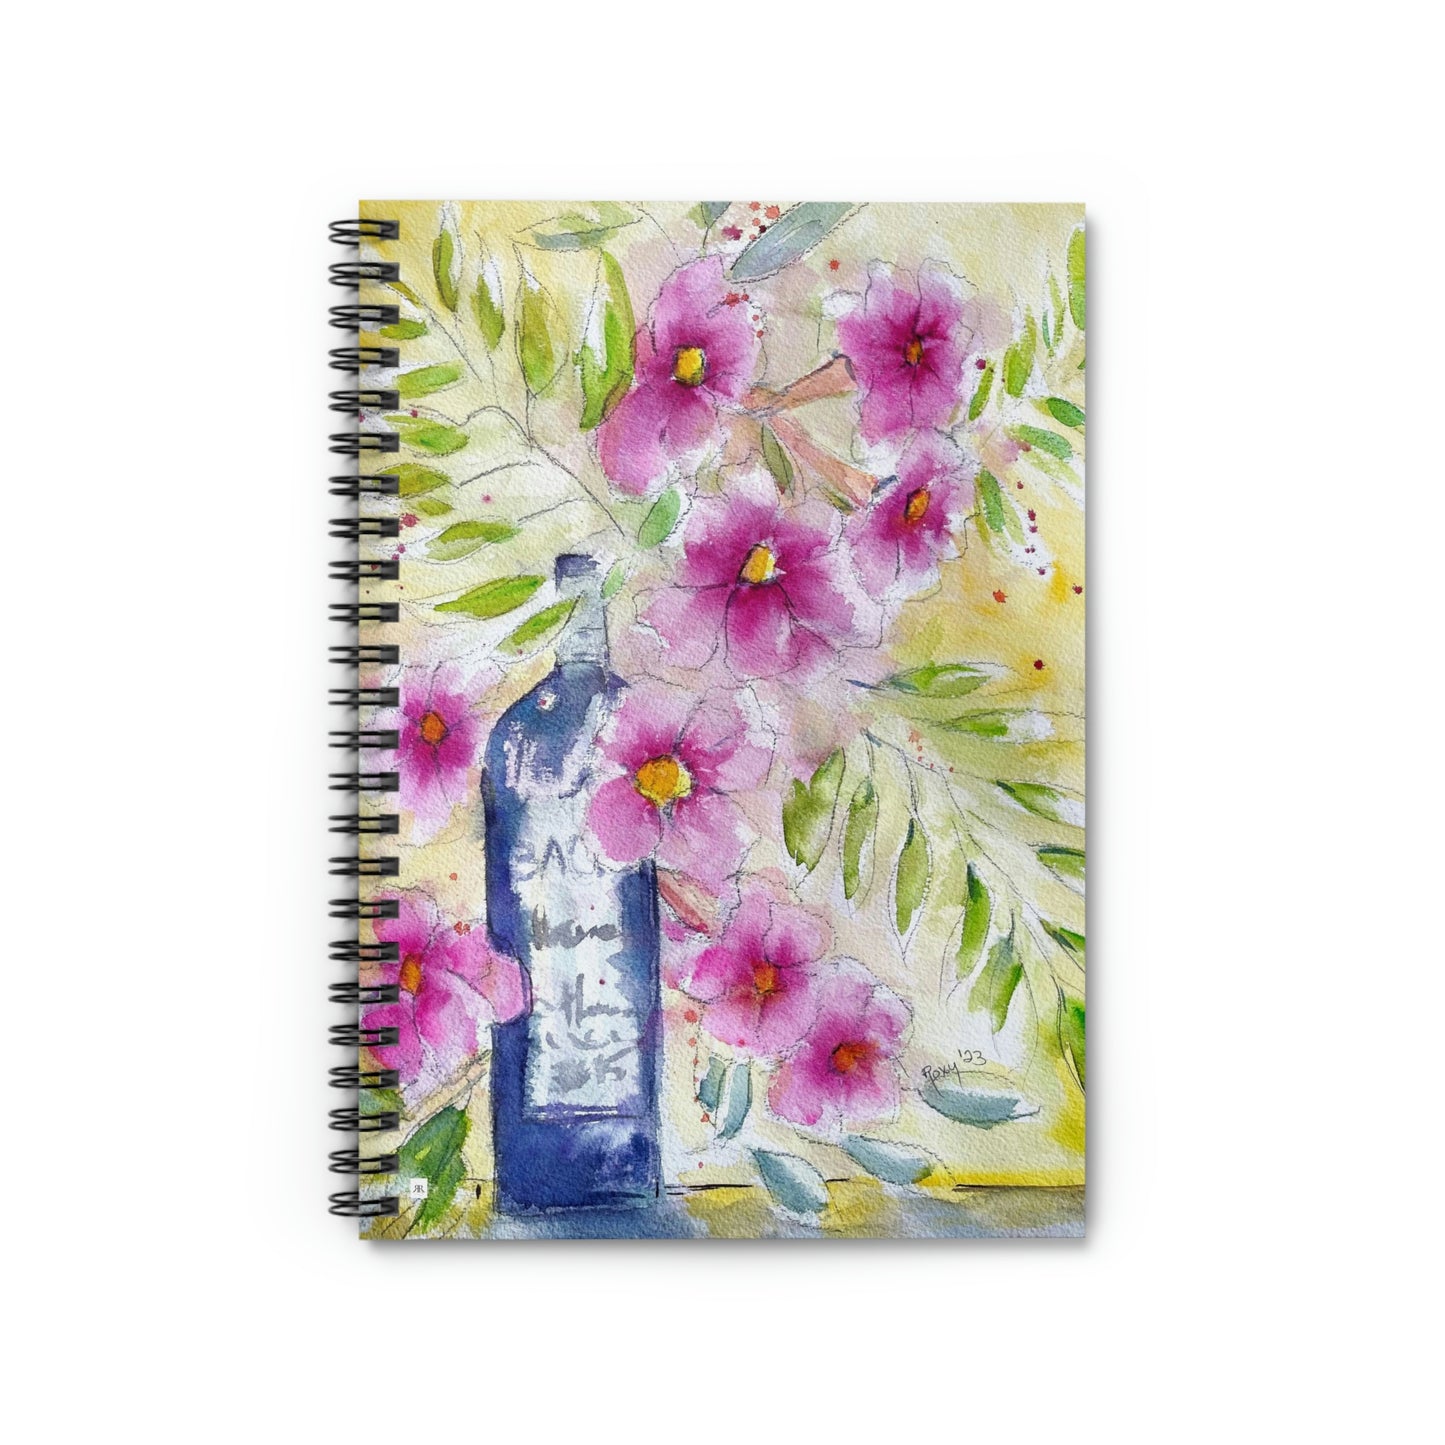 Bottle and Blooms Spiral Notebook